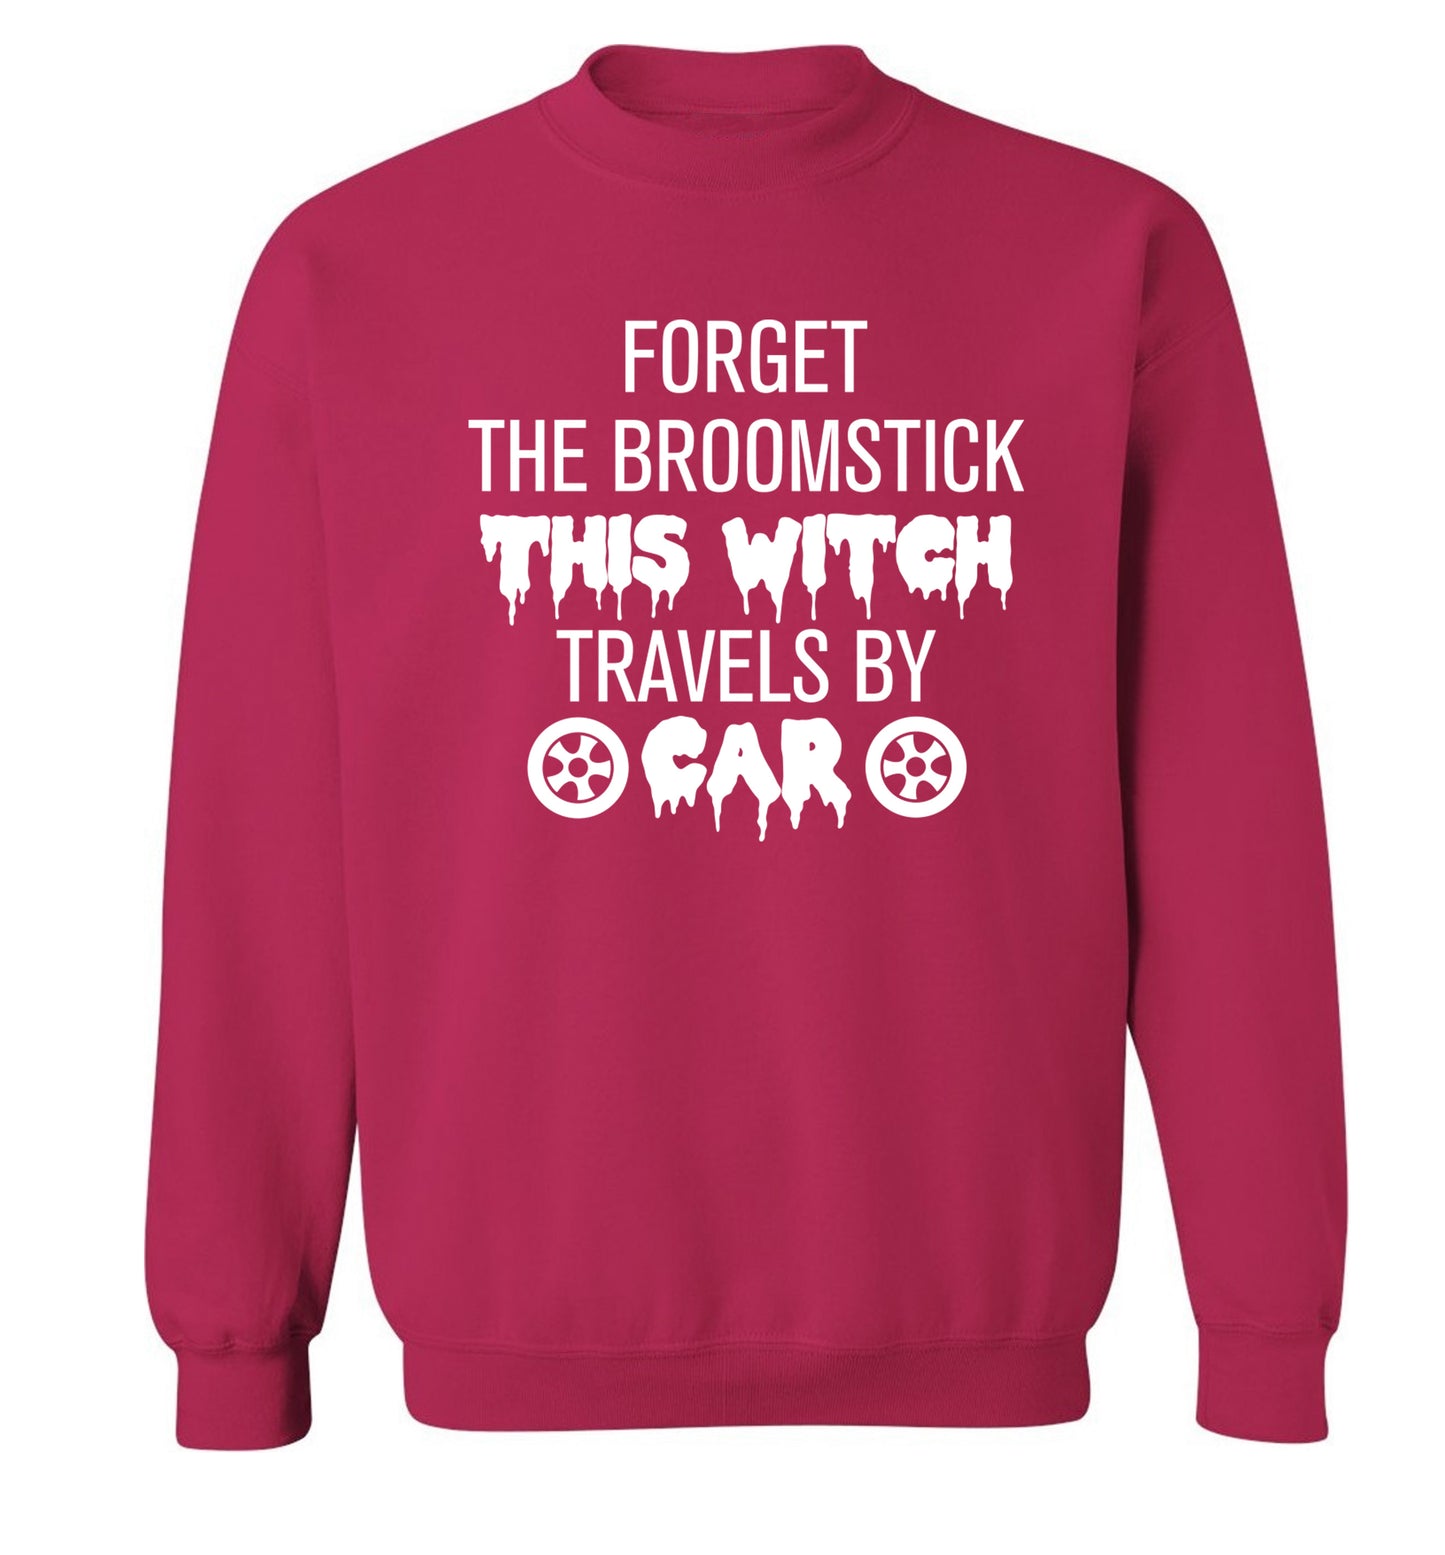 Forget the broomstick this witch travels by car Adult's unisexpink Sweater 2XL